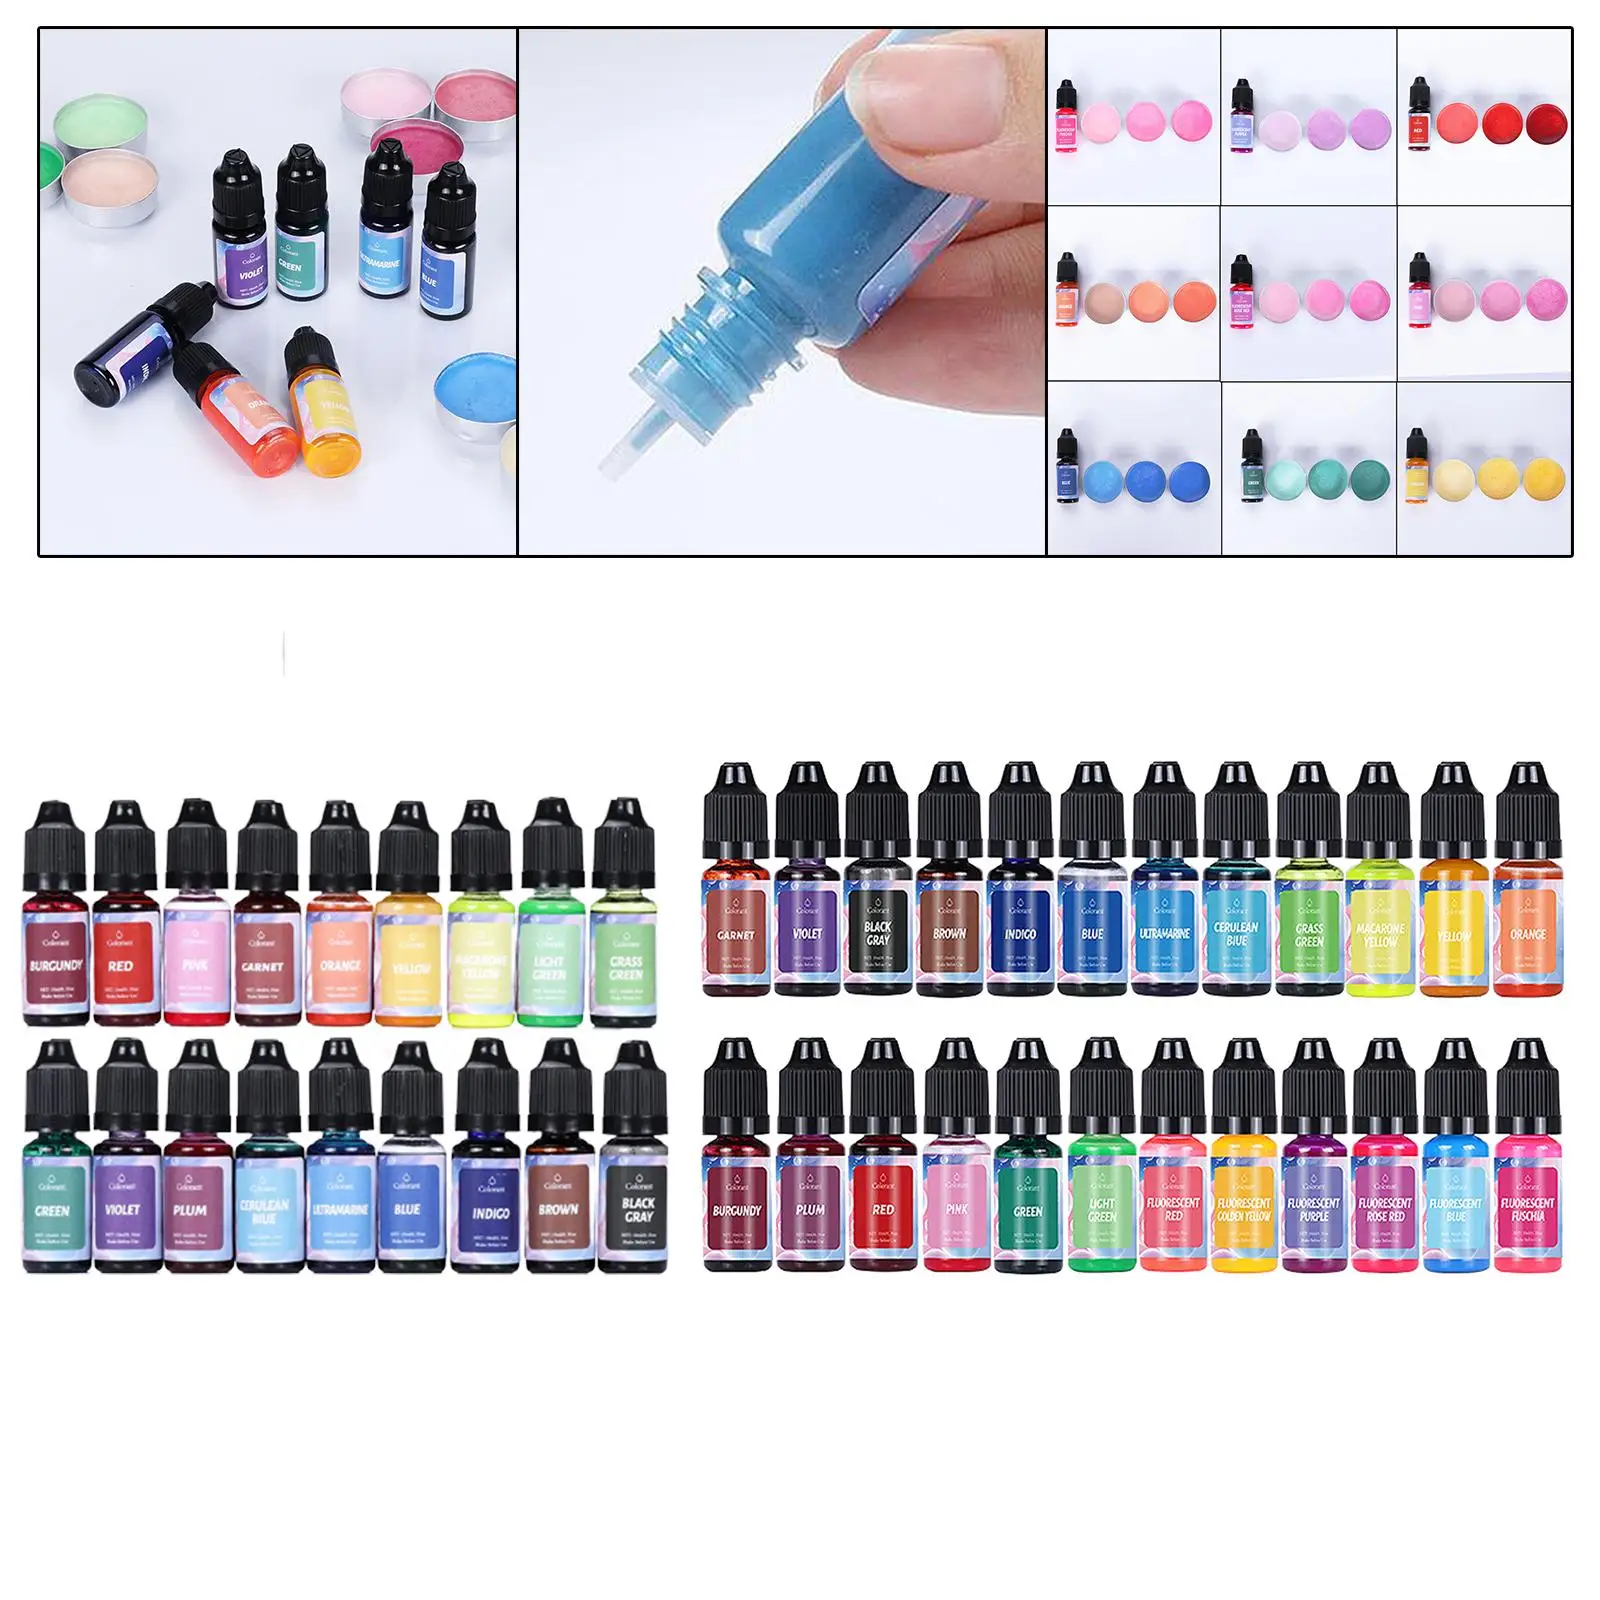 Candle Dye Liquid, Candle Color Dye Soap Coloring Candle Pigment 10ml Each